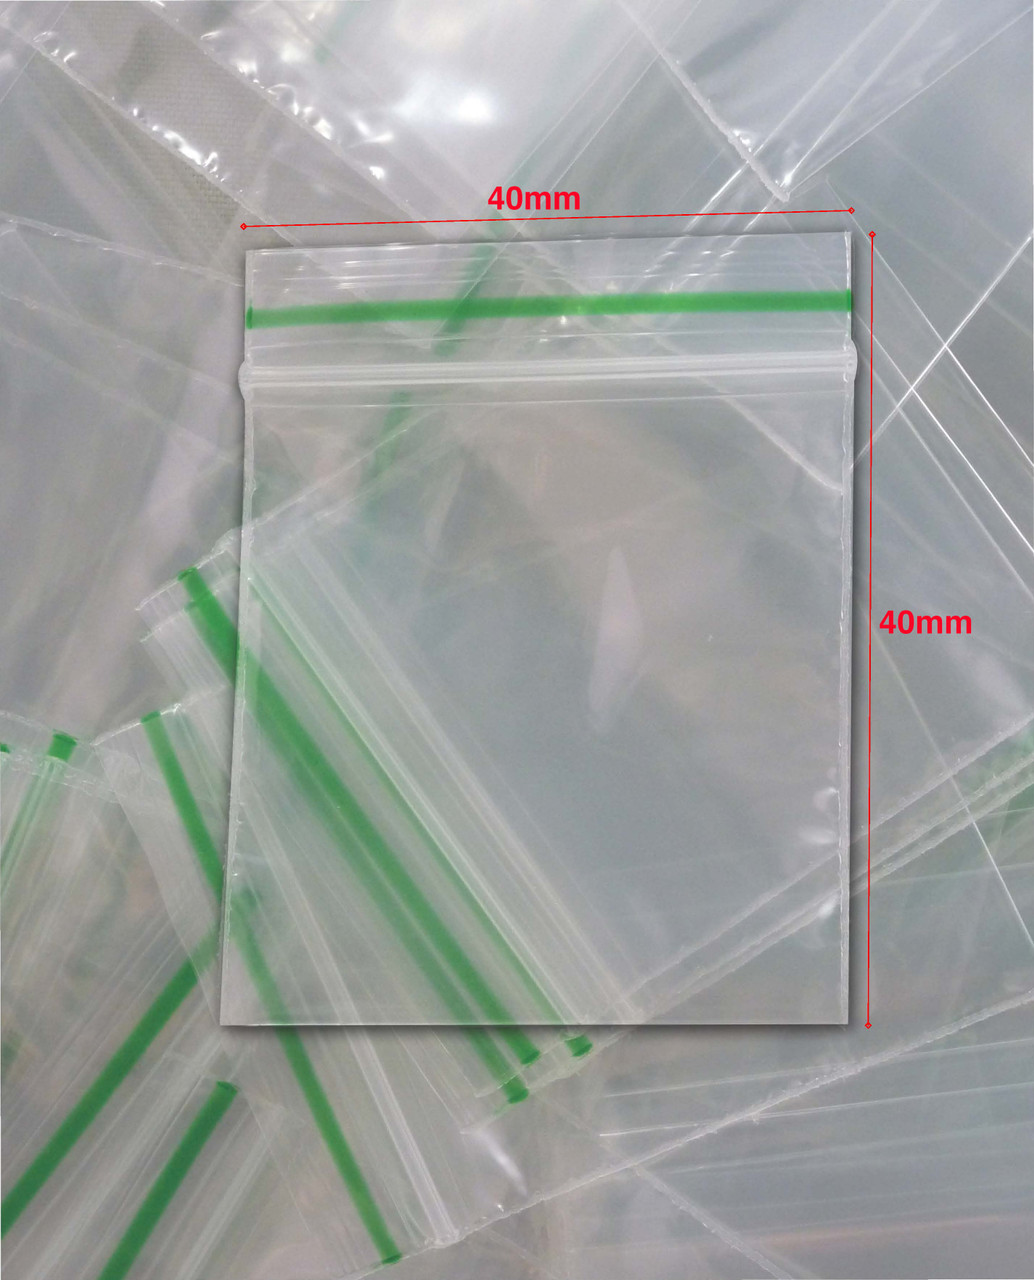 100 NEW 40mmx40mm Small Clear Plastic Bags Baggy Grip Seal 40x40 mm Zip 4x4 cm 